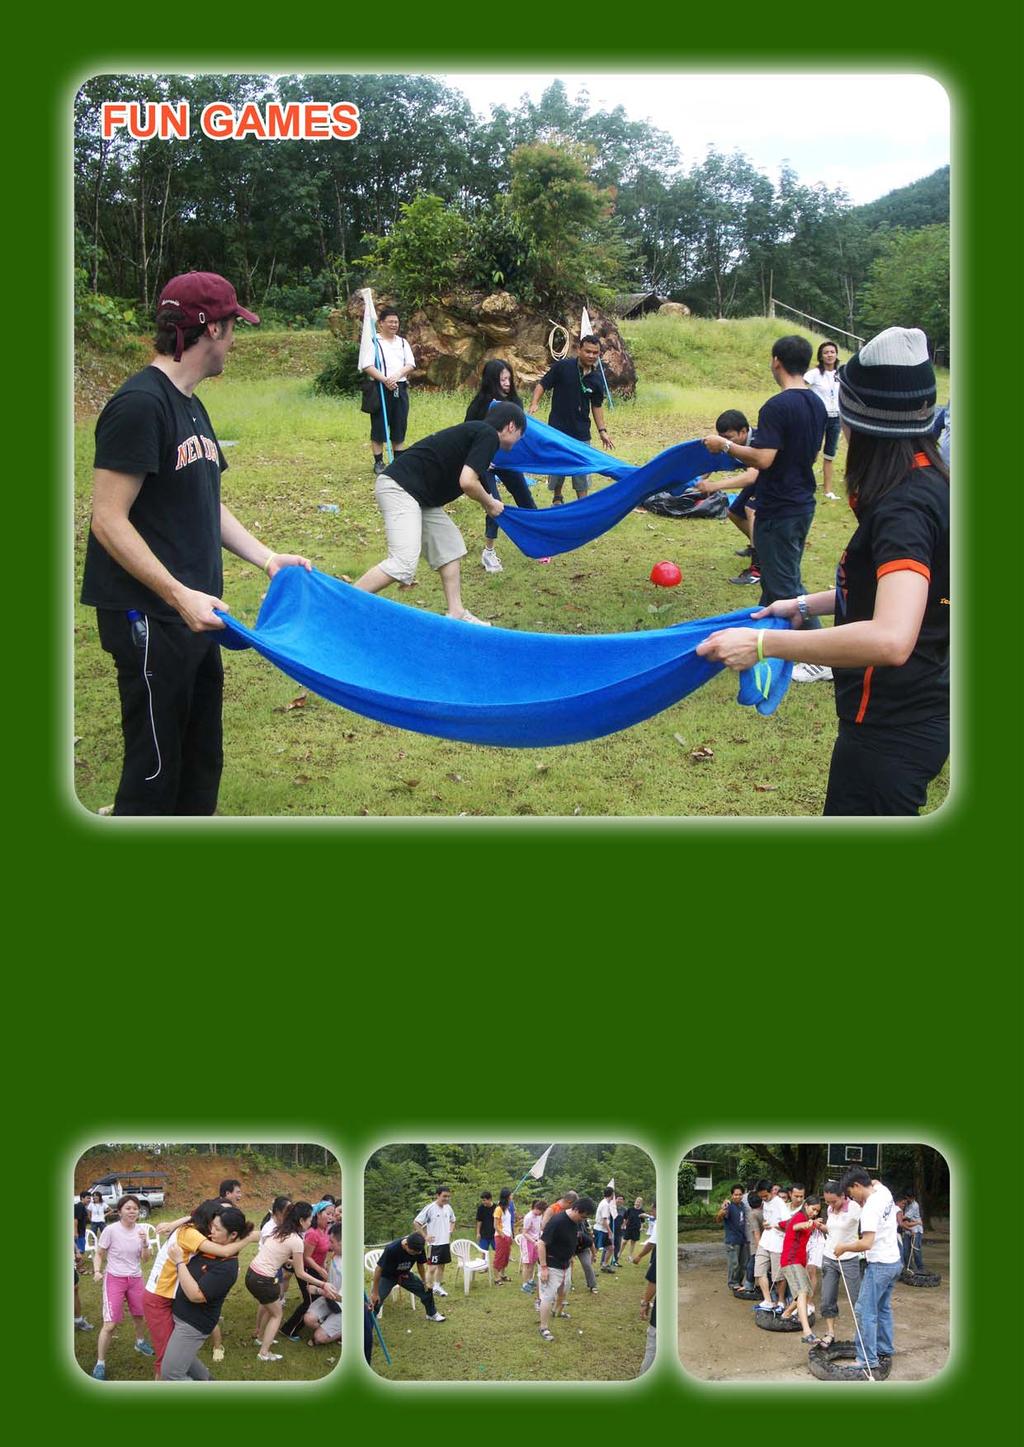 Fun Games Sealand Camp can offer many fun games to create harmony among your colleagues.